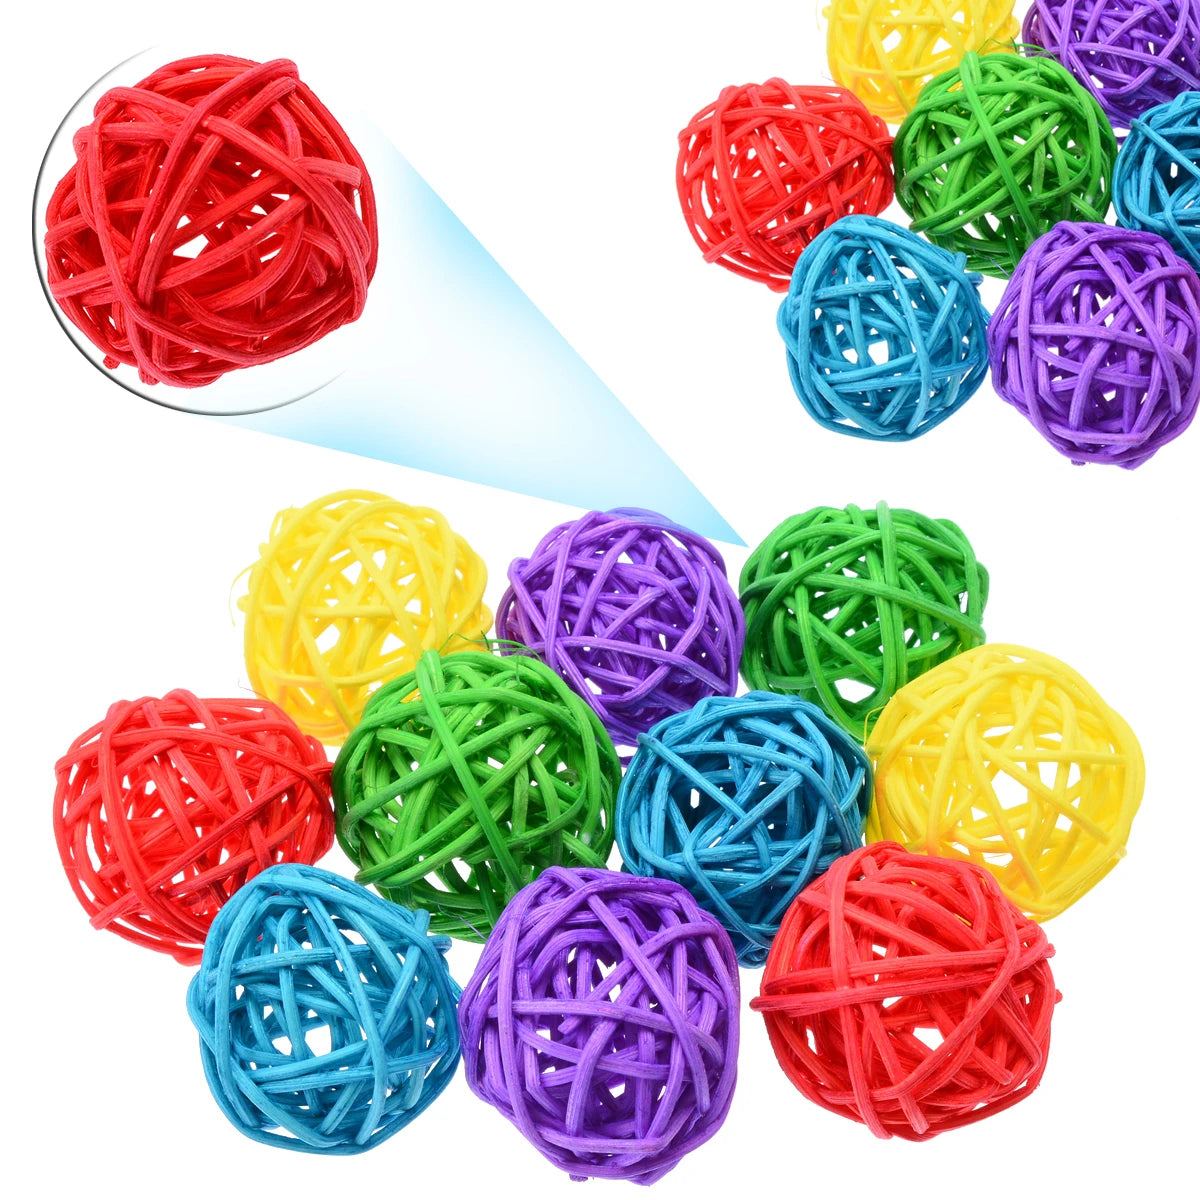 Parrot Bird Toy 10 Pieces Multicolored Ball Chew Biting Funny Anti-Stress Pet Accessories 